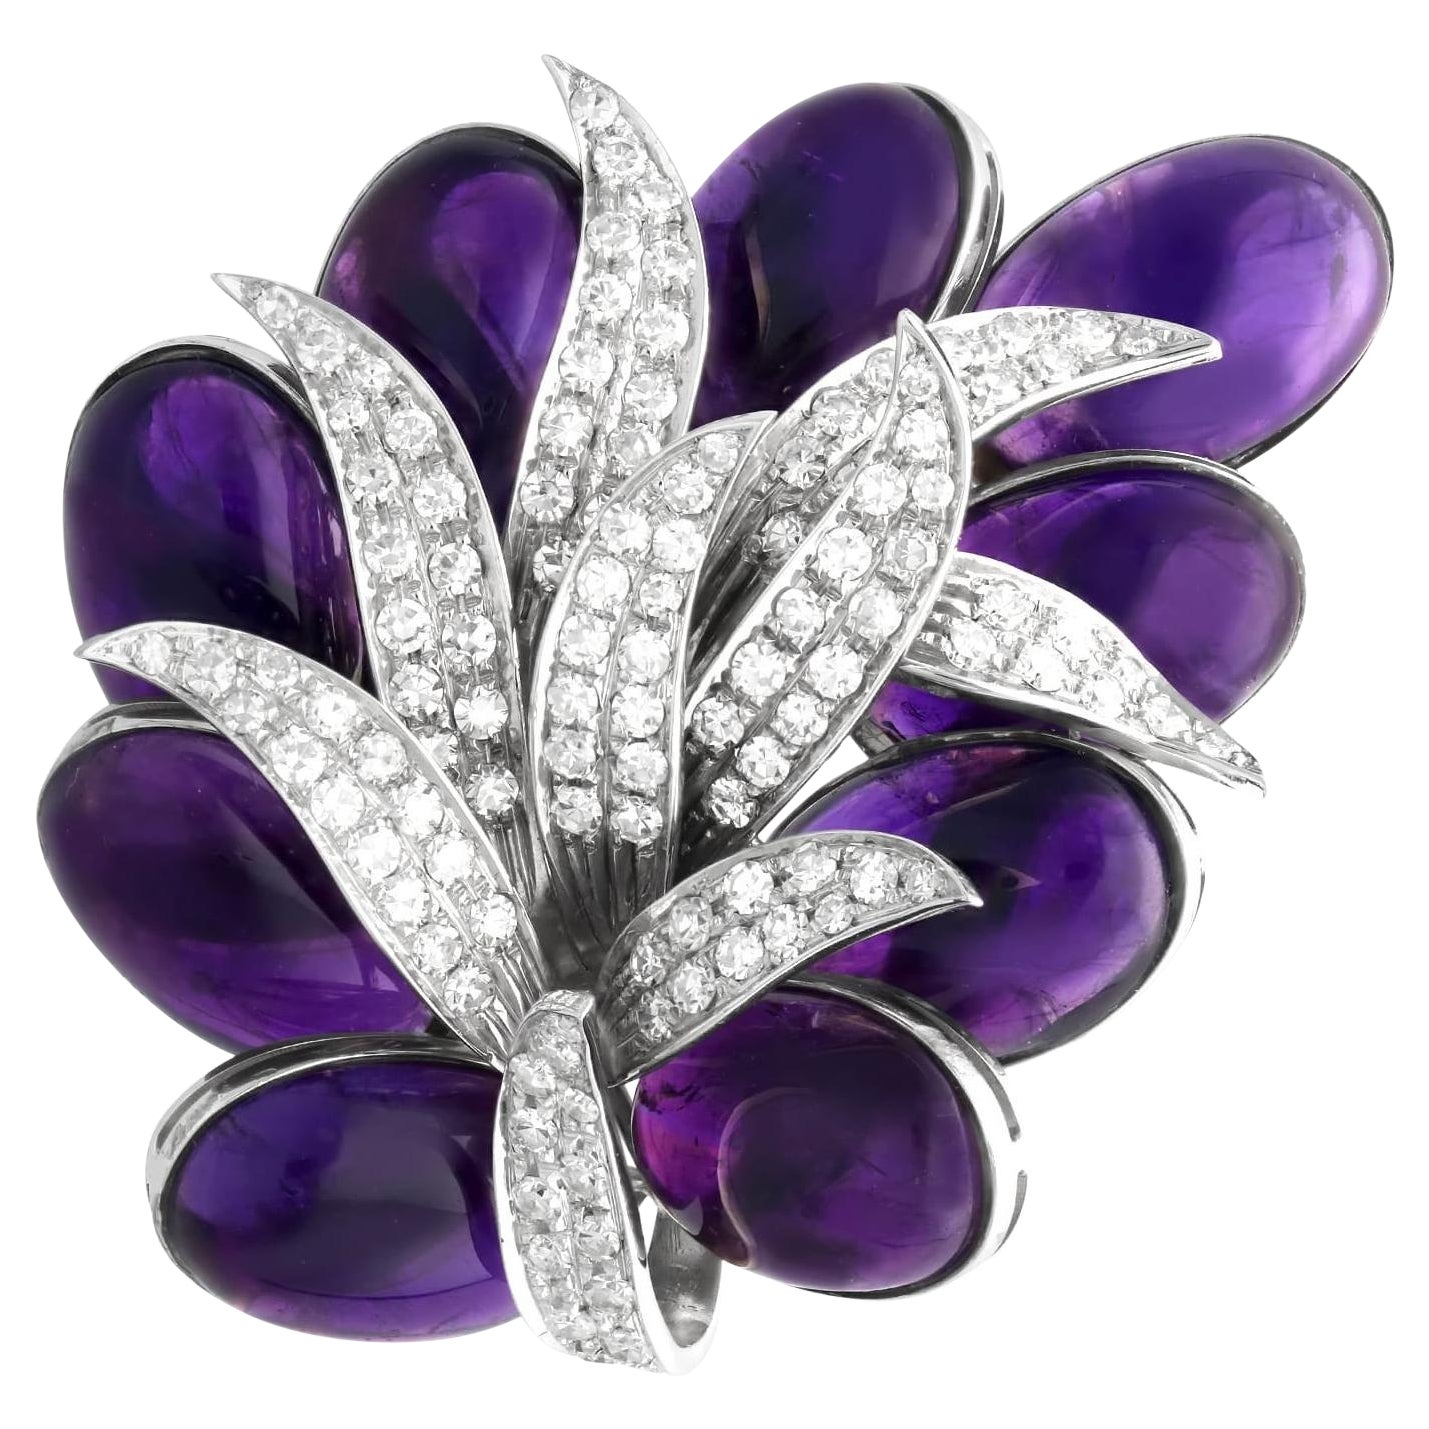 Vintage 55Ct Amethyst and 3.02Ct Diamond 18k White Gold Brooch Circa 1950 For Sale